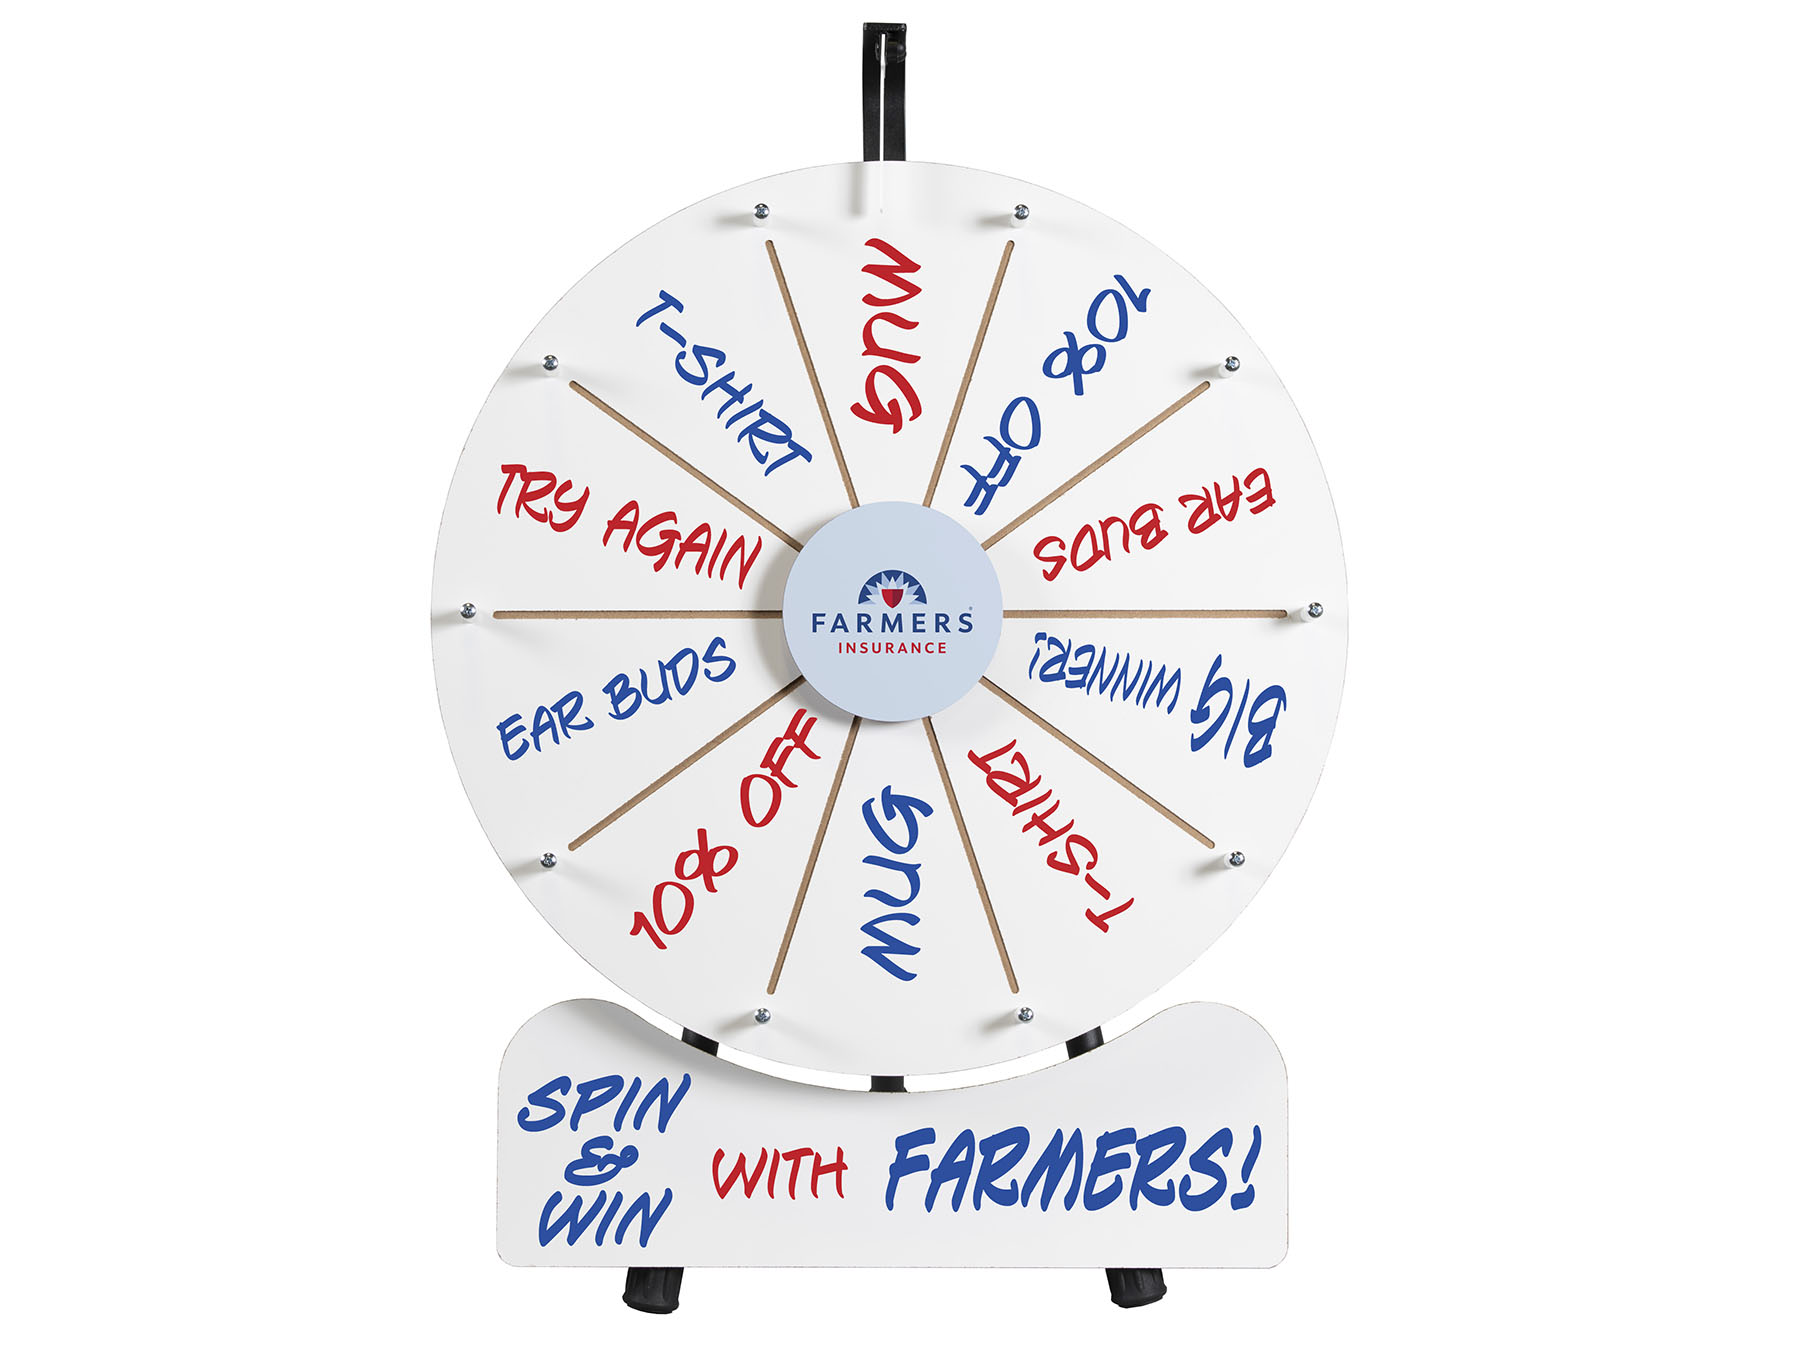 and Parties Brybelly Spin it to Win It Prize Wheel Office Games Tabletop Prize Wheels for Trade Shows Adjustable Spin Speed 15 14 Blank Dry Erase Slots Customizable Dry Erase Button